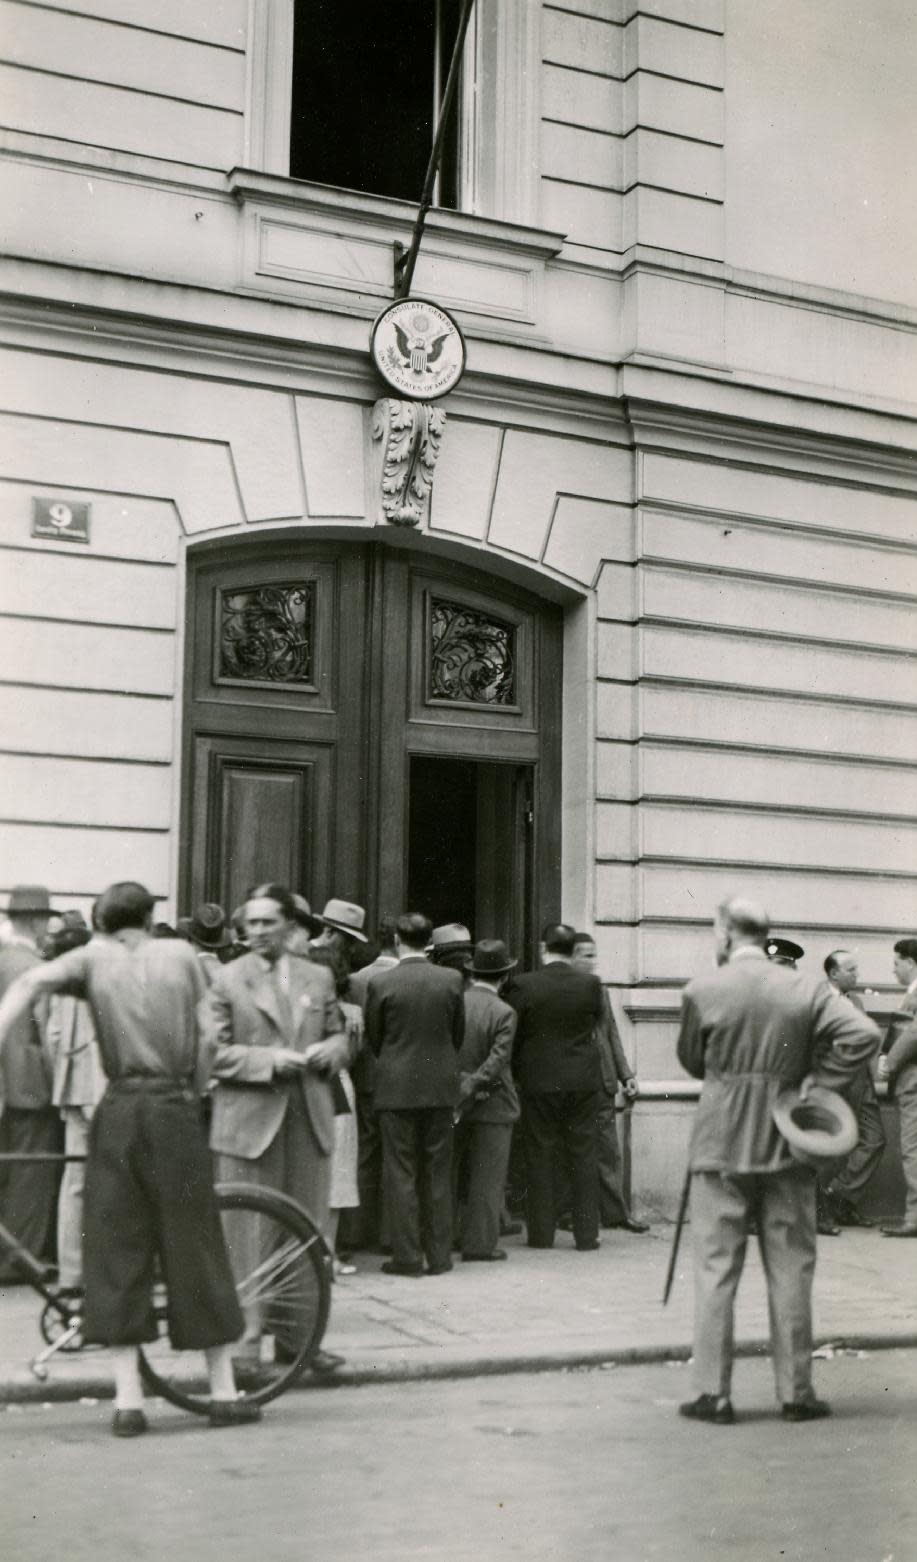 In this 1938 photo provided by the Museum of Jewish Heritage - A Living Memorial to the Holocaust, prospective immigrants line up outside the U.S. consulate in Vienna after the German annexation of Austria. An exhibition opening at the museum on Tuesday, May 21, 2013 called “Against All Odds: American Jews and the Rescue of Europe’s Refugees, 1933-1941,” documents efforts by American Jews to get refugees out of Nazi-era Europe despite strict immigration quotas in the U.S. (AP Photo/Museum of Jewish Heritage/Courtesy of the Franklin D. Roosevelt Presidential Library & Museum)